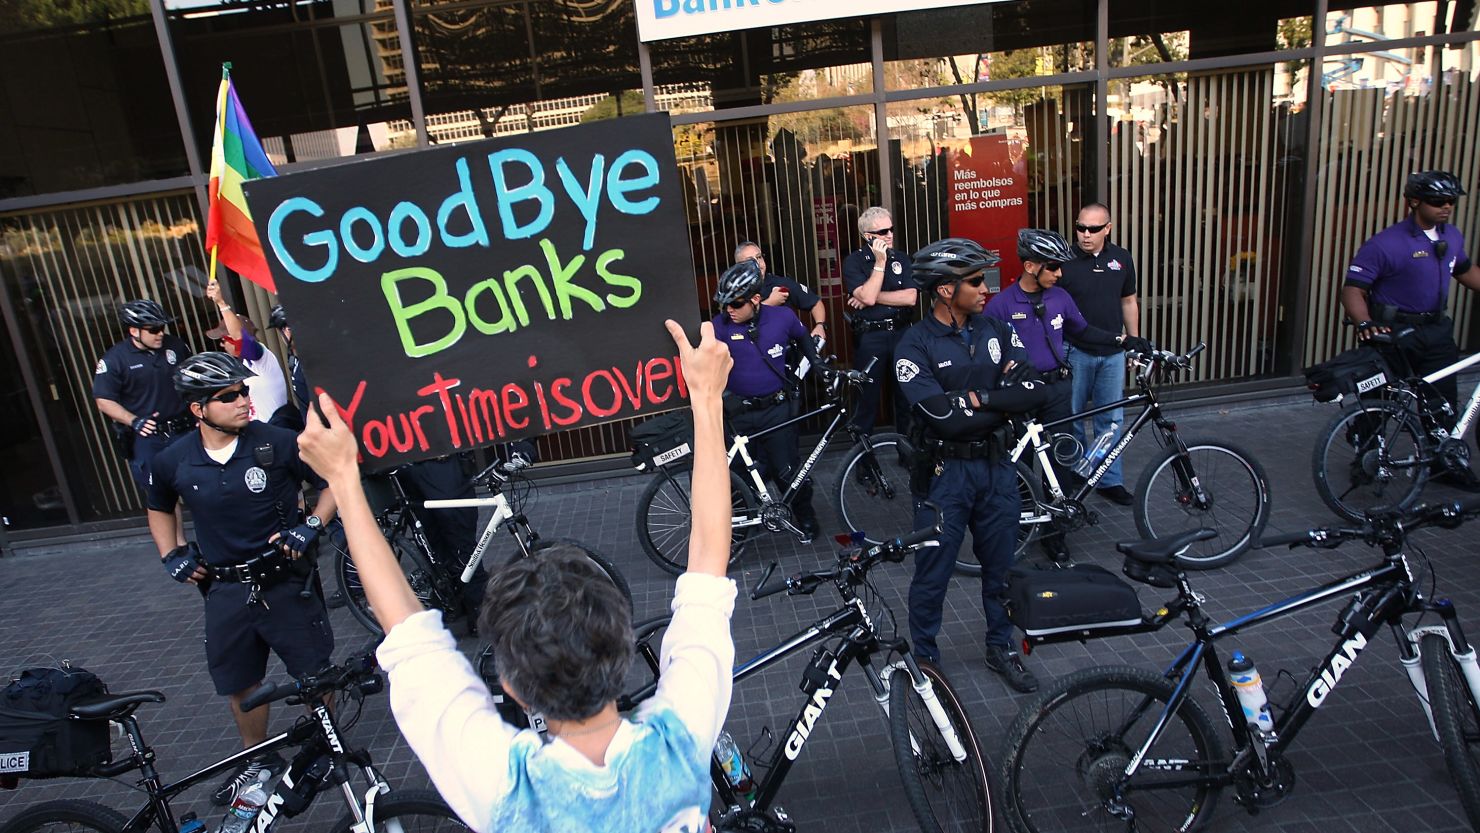 The Occupy Wall Street movement, which started in New York in September, has spread across major cities worldwide.